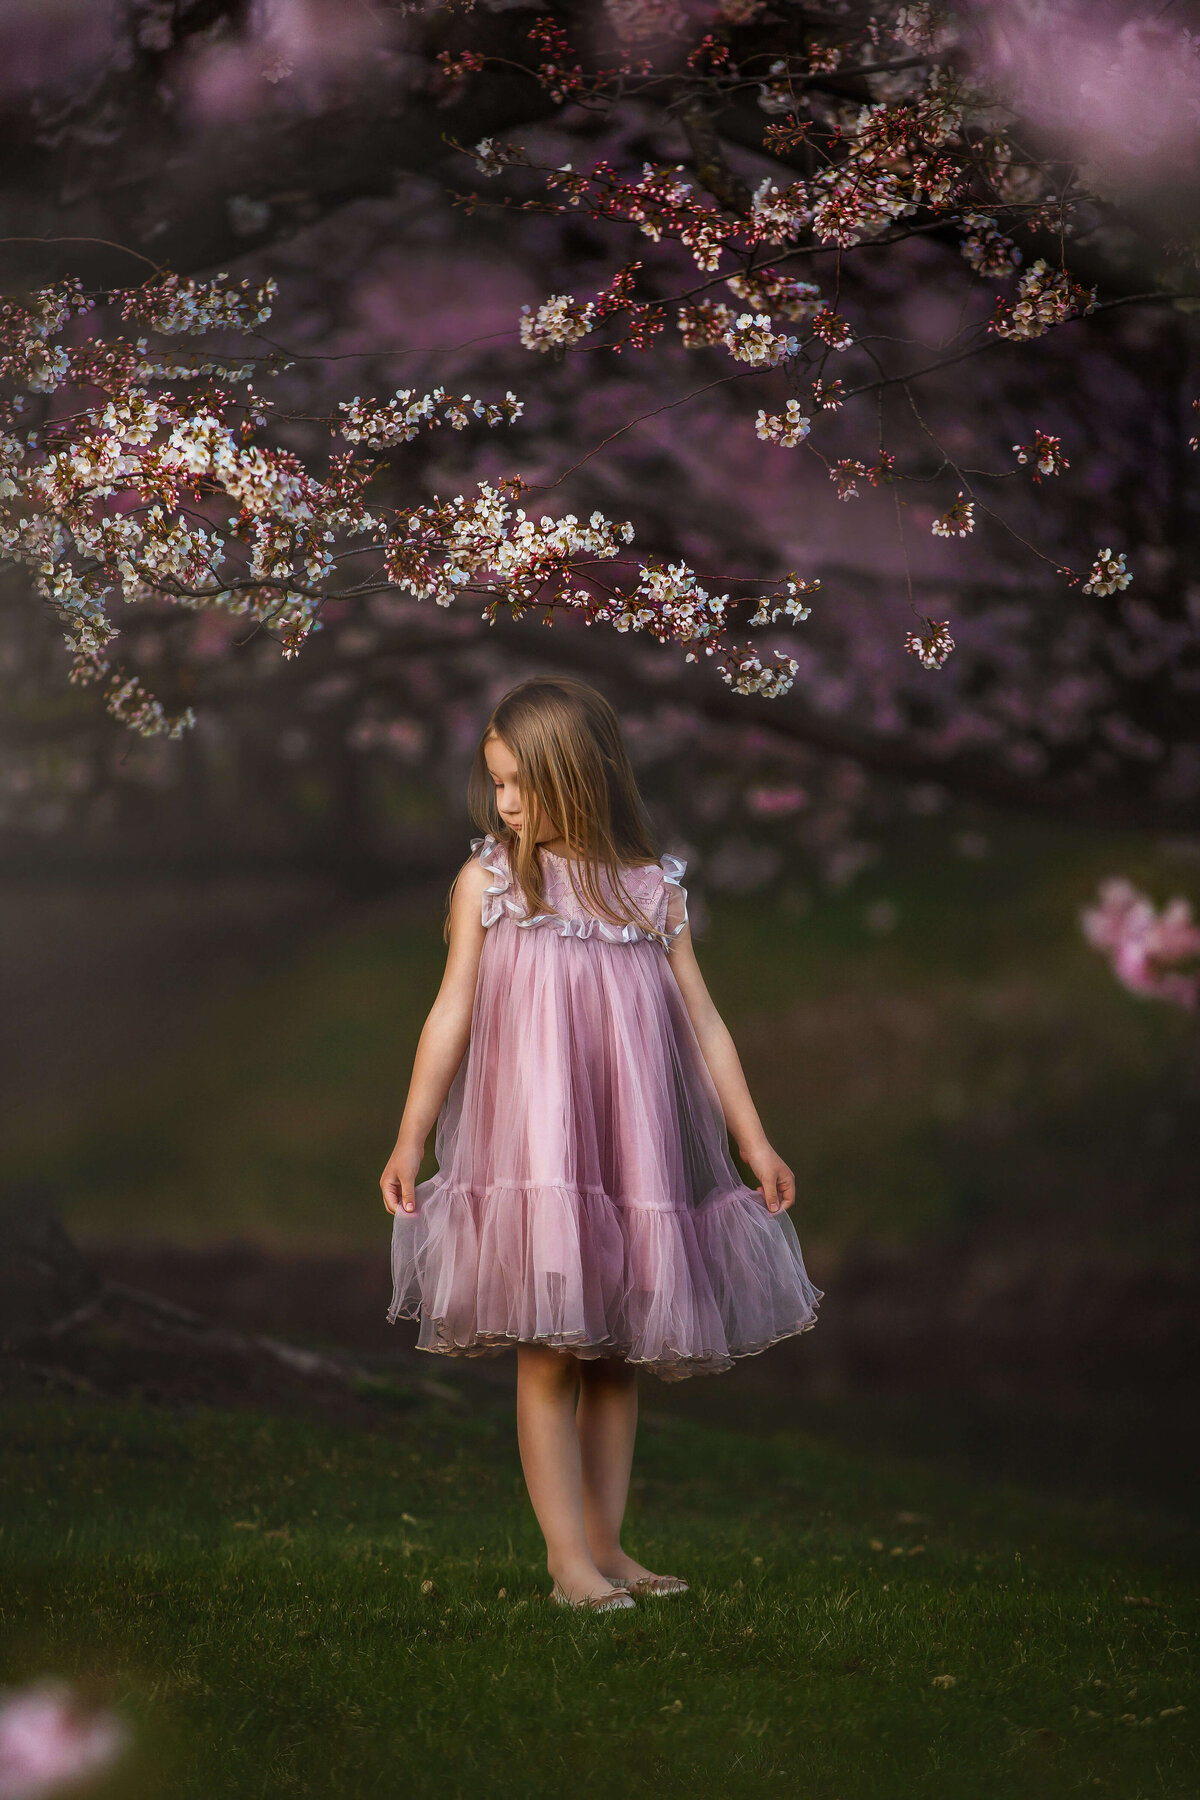 Girl in pink dress standing by cherry blossom trees